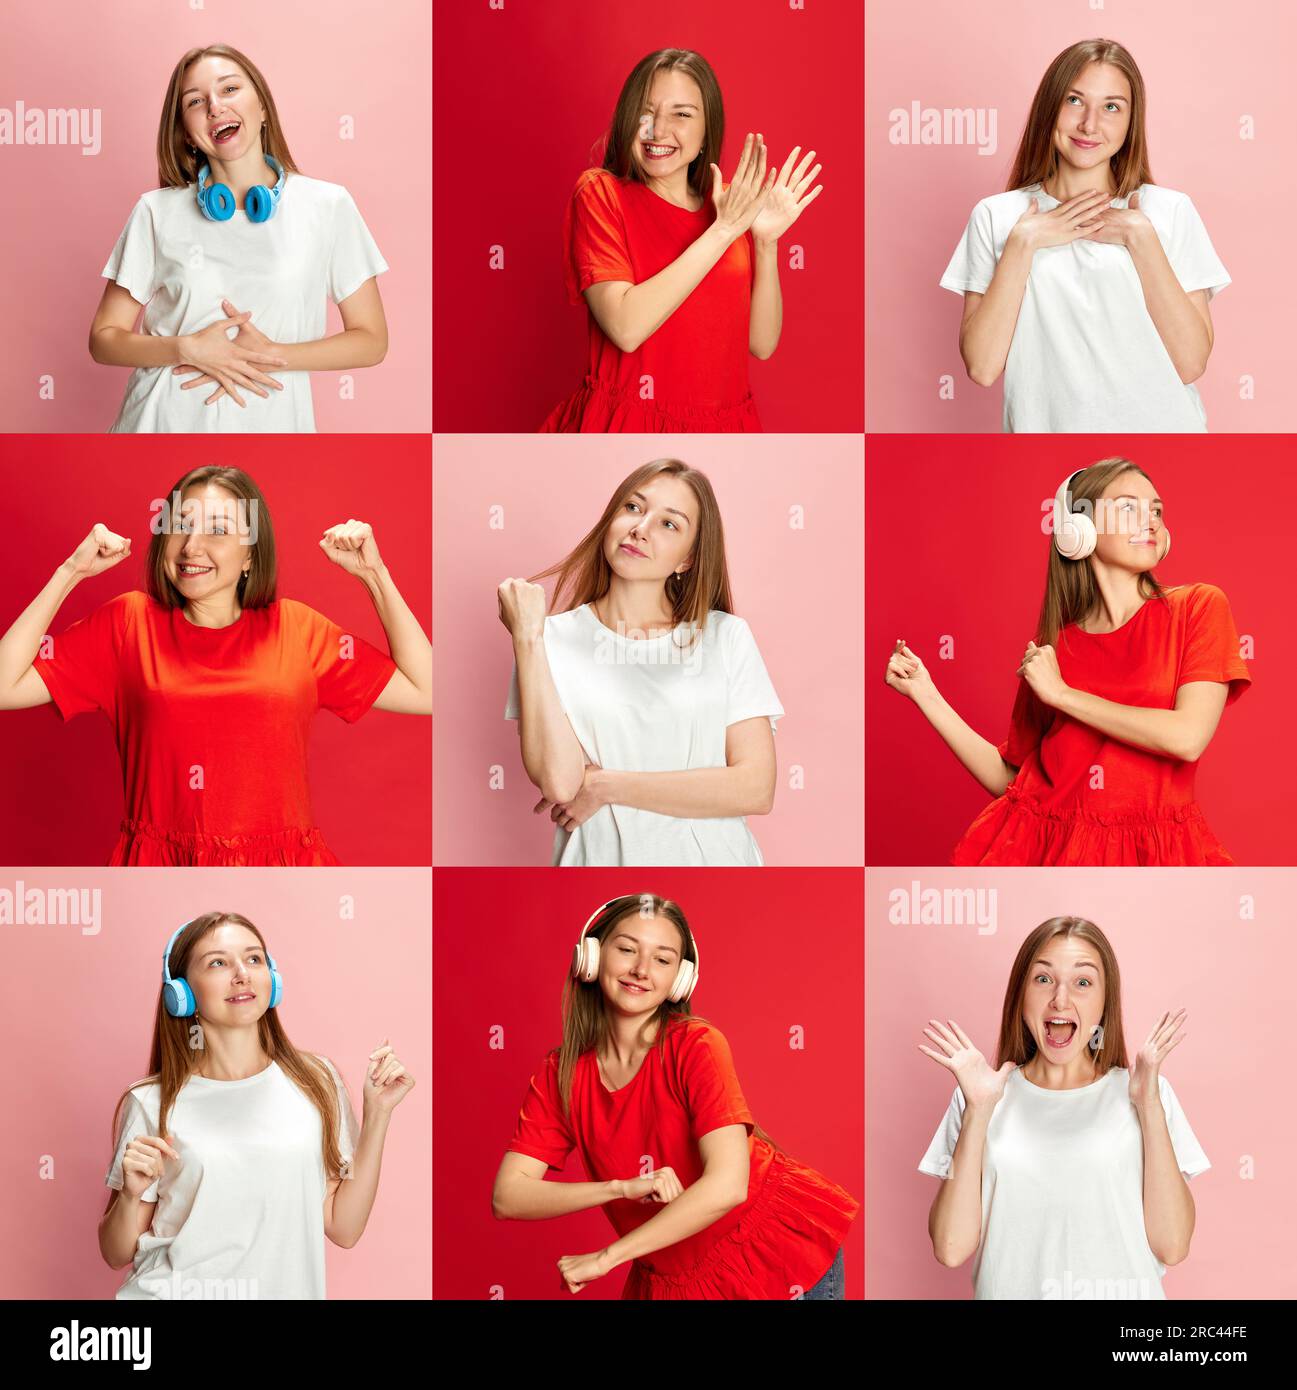 Girl Set Of Poses: Over 45,362 Royalty-Free Licensable Stock Photos |  Shutterstock